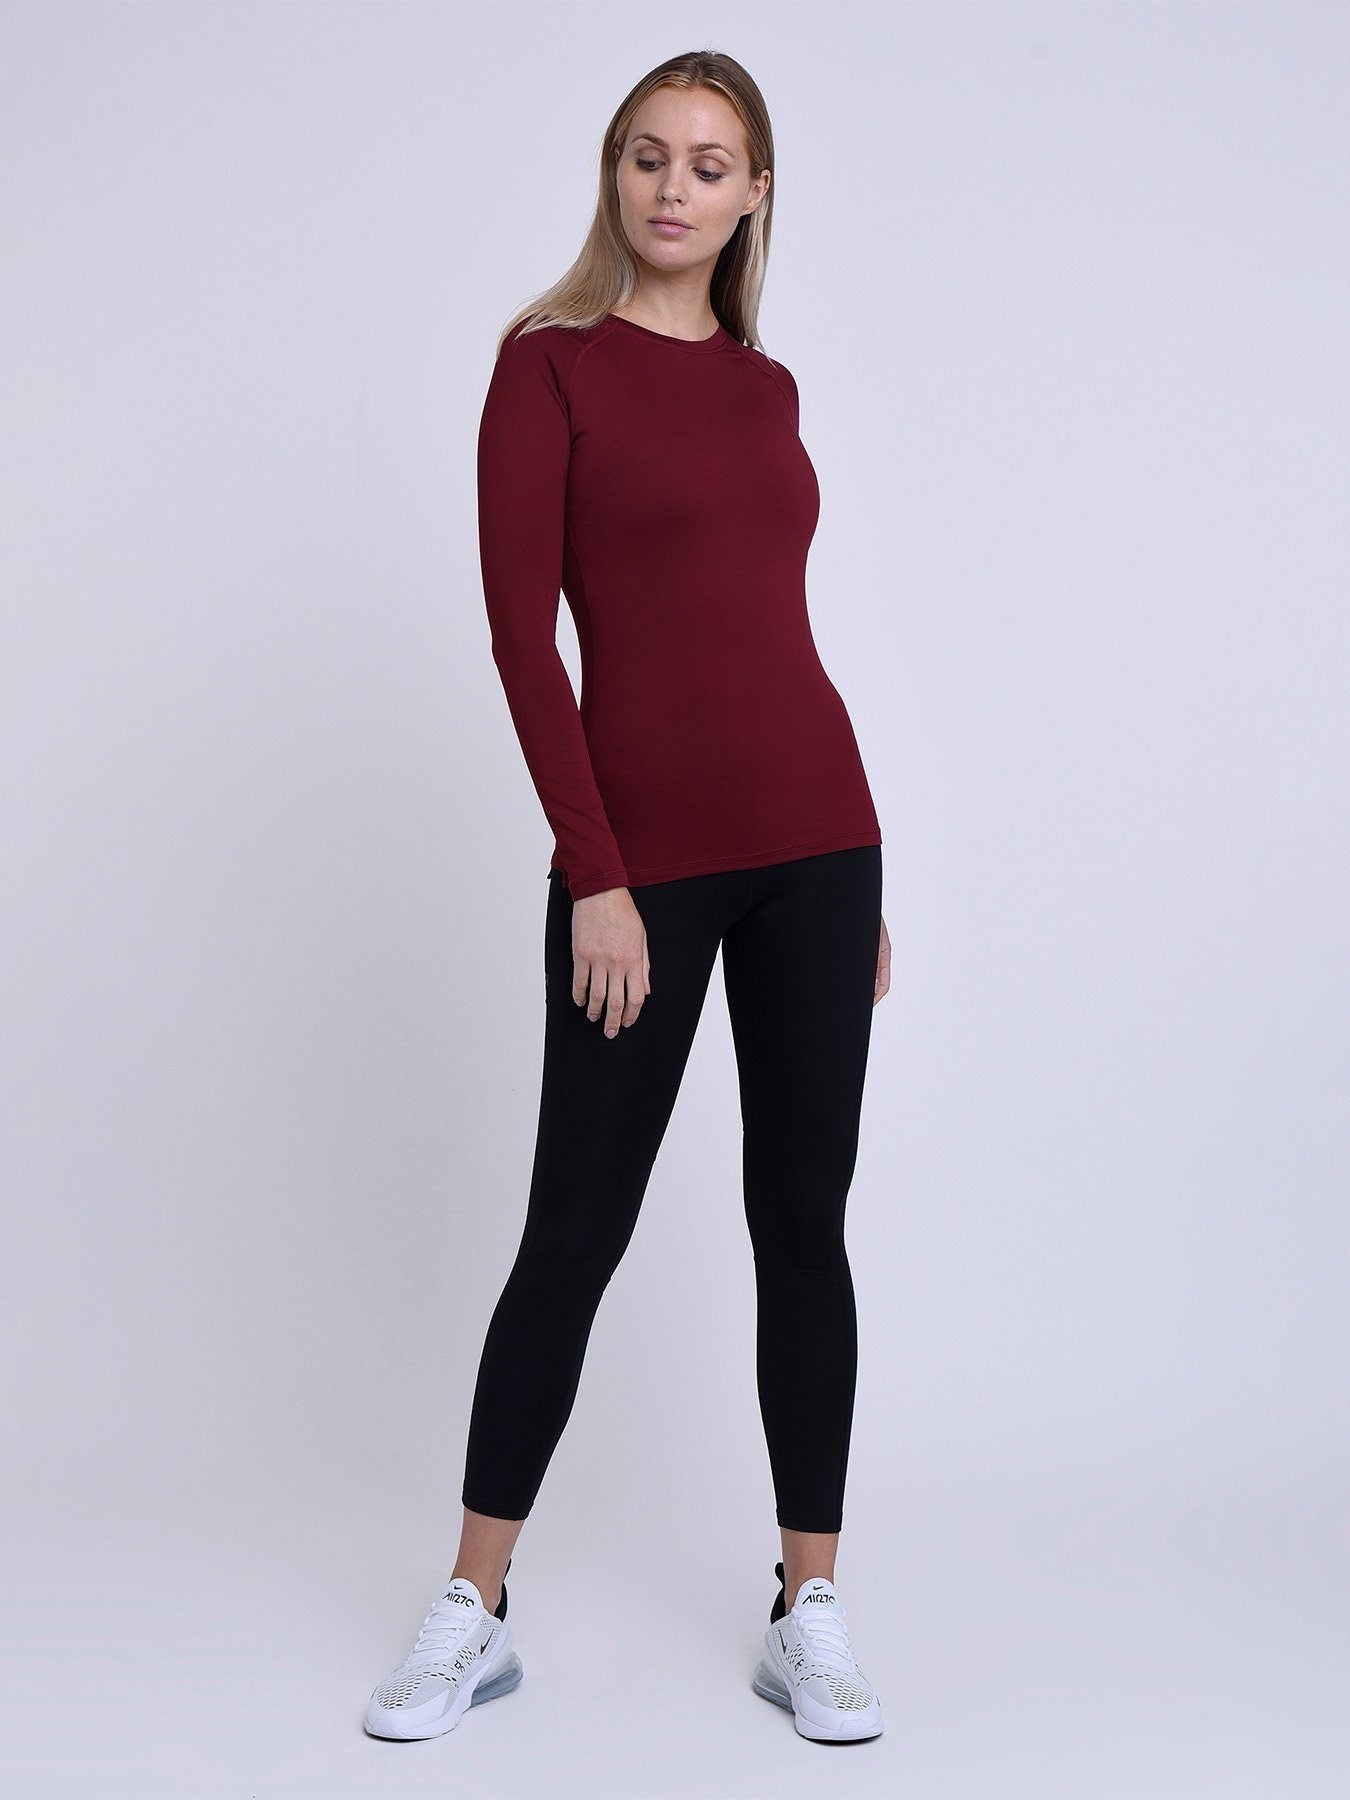 Women's SuperThermal Long Sleeve Compression Running Topp - Cabernet